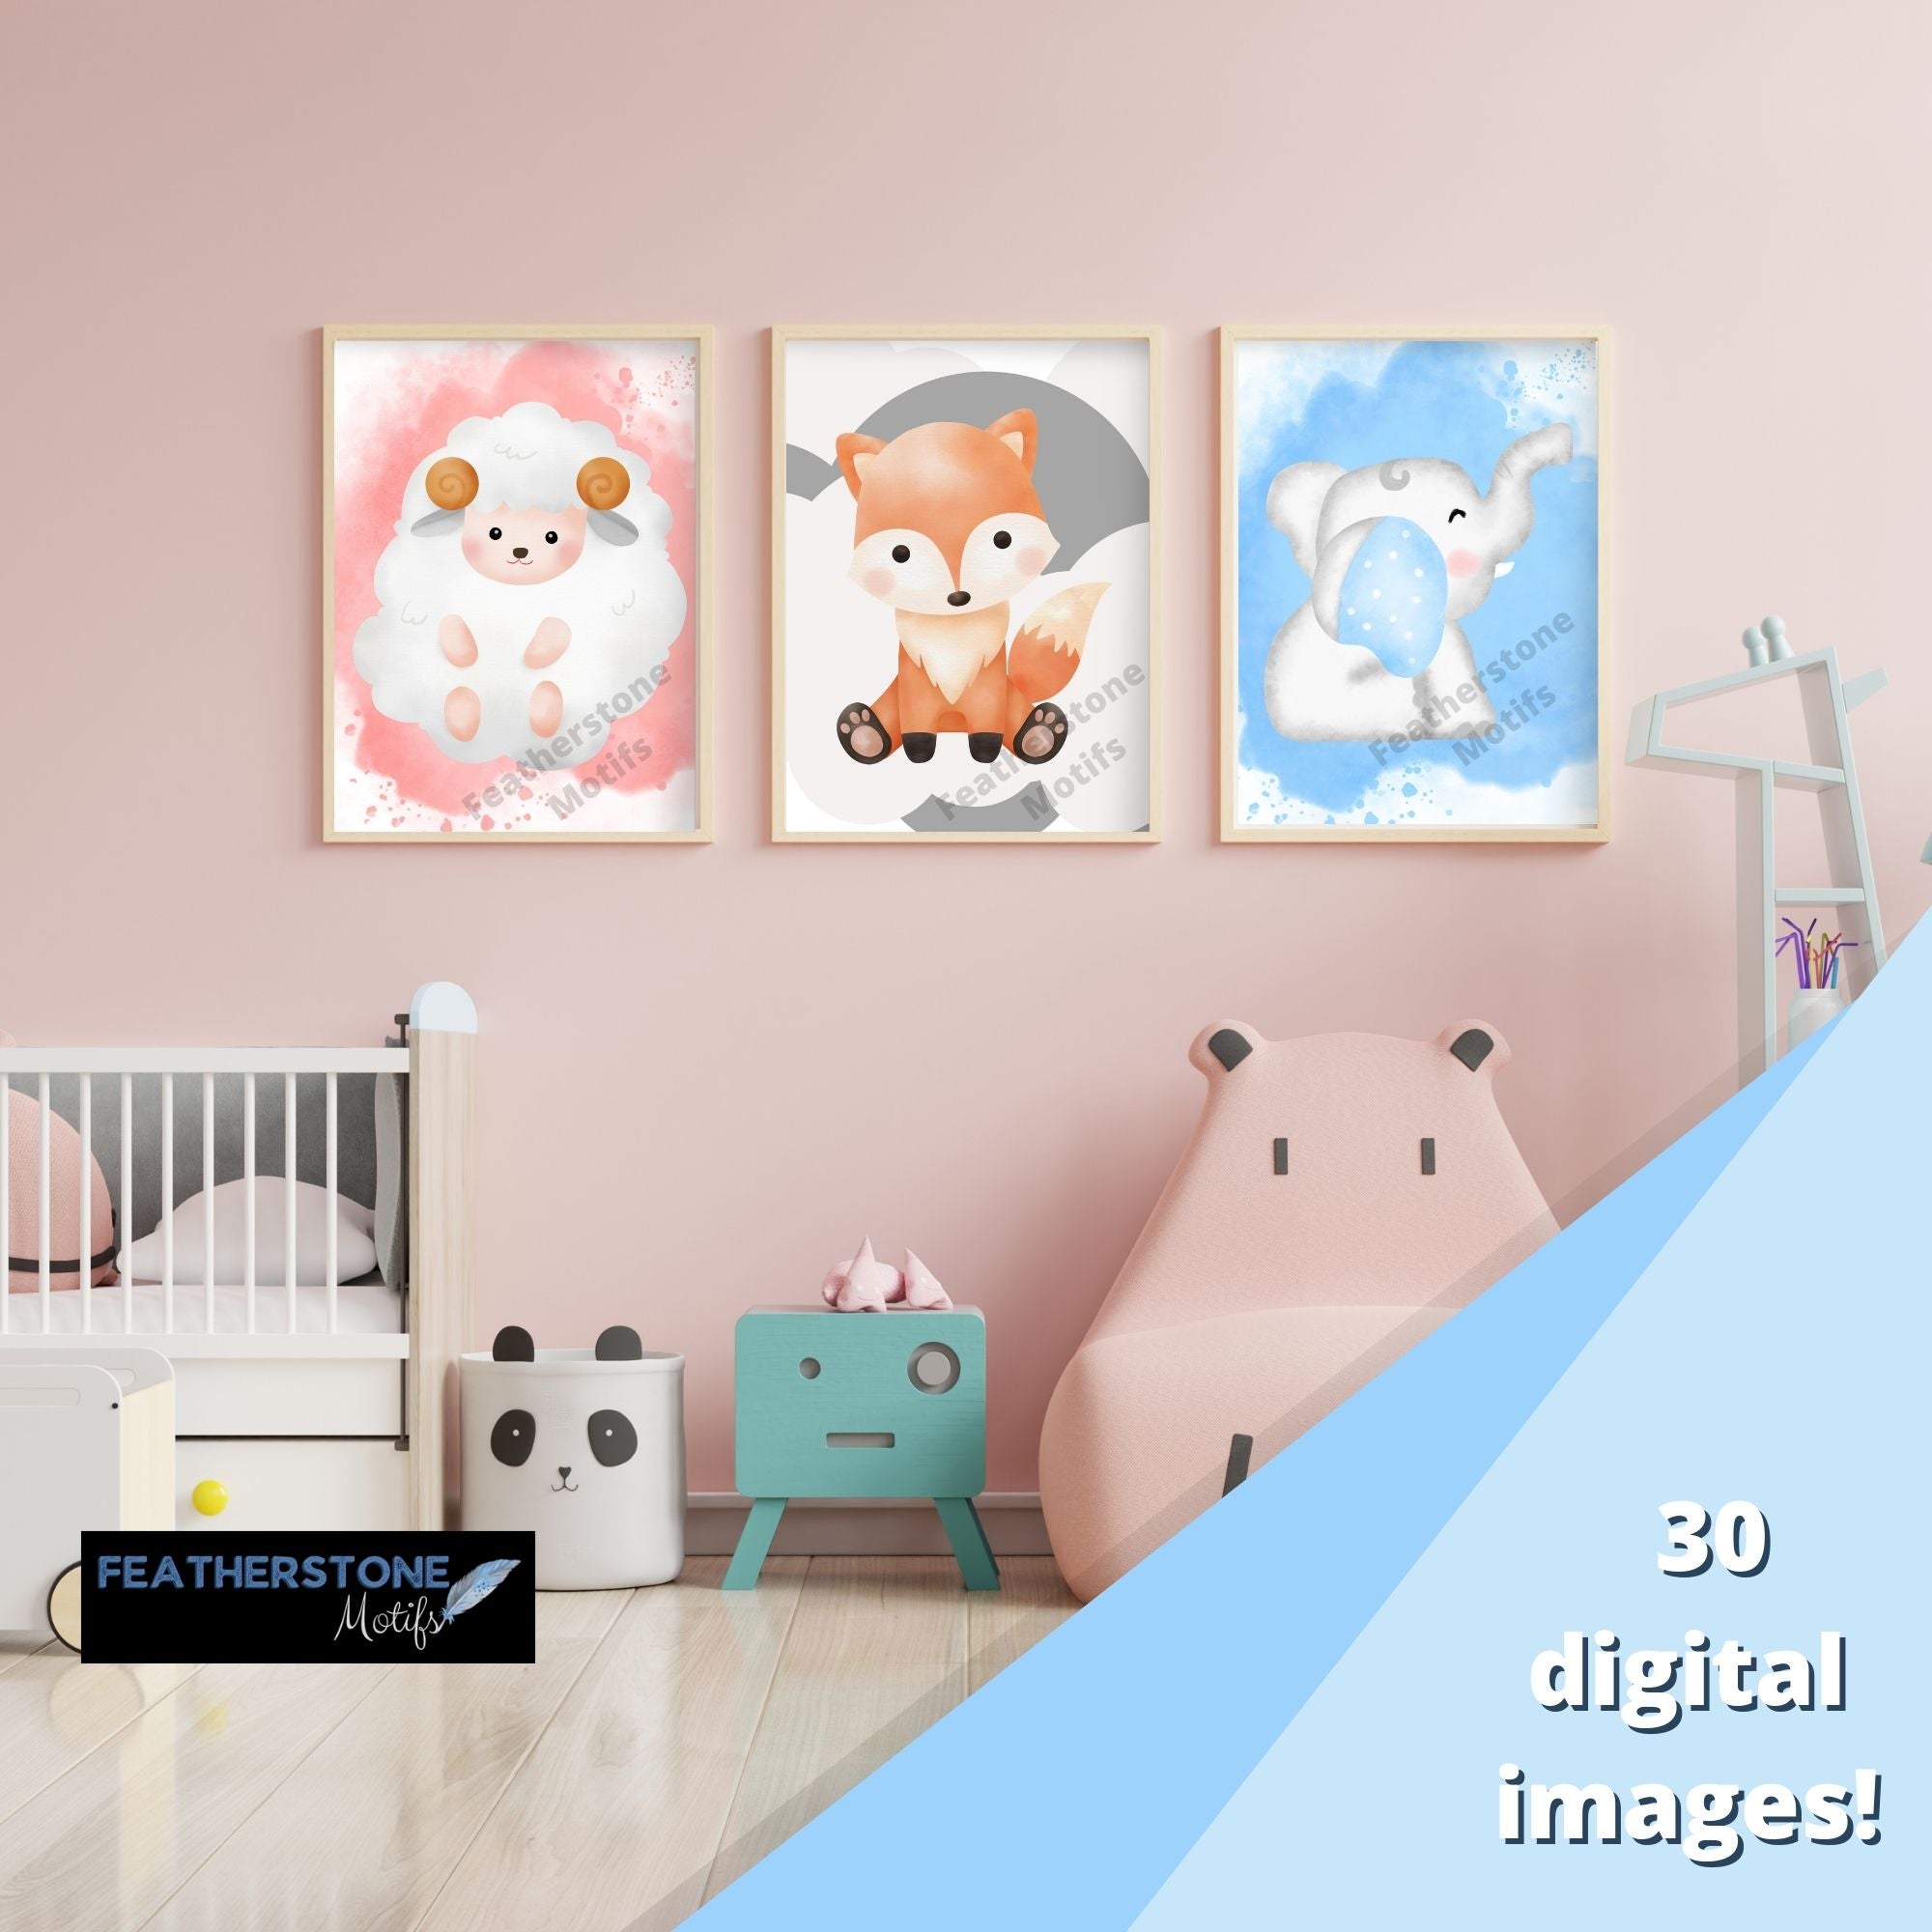 Adorable baby animals! This digital download will allow you to instantly download images of baby sheep, fox, reindeer, elephants, and hedgehogs. 